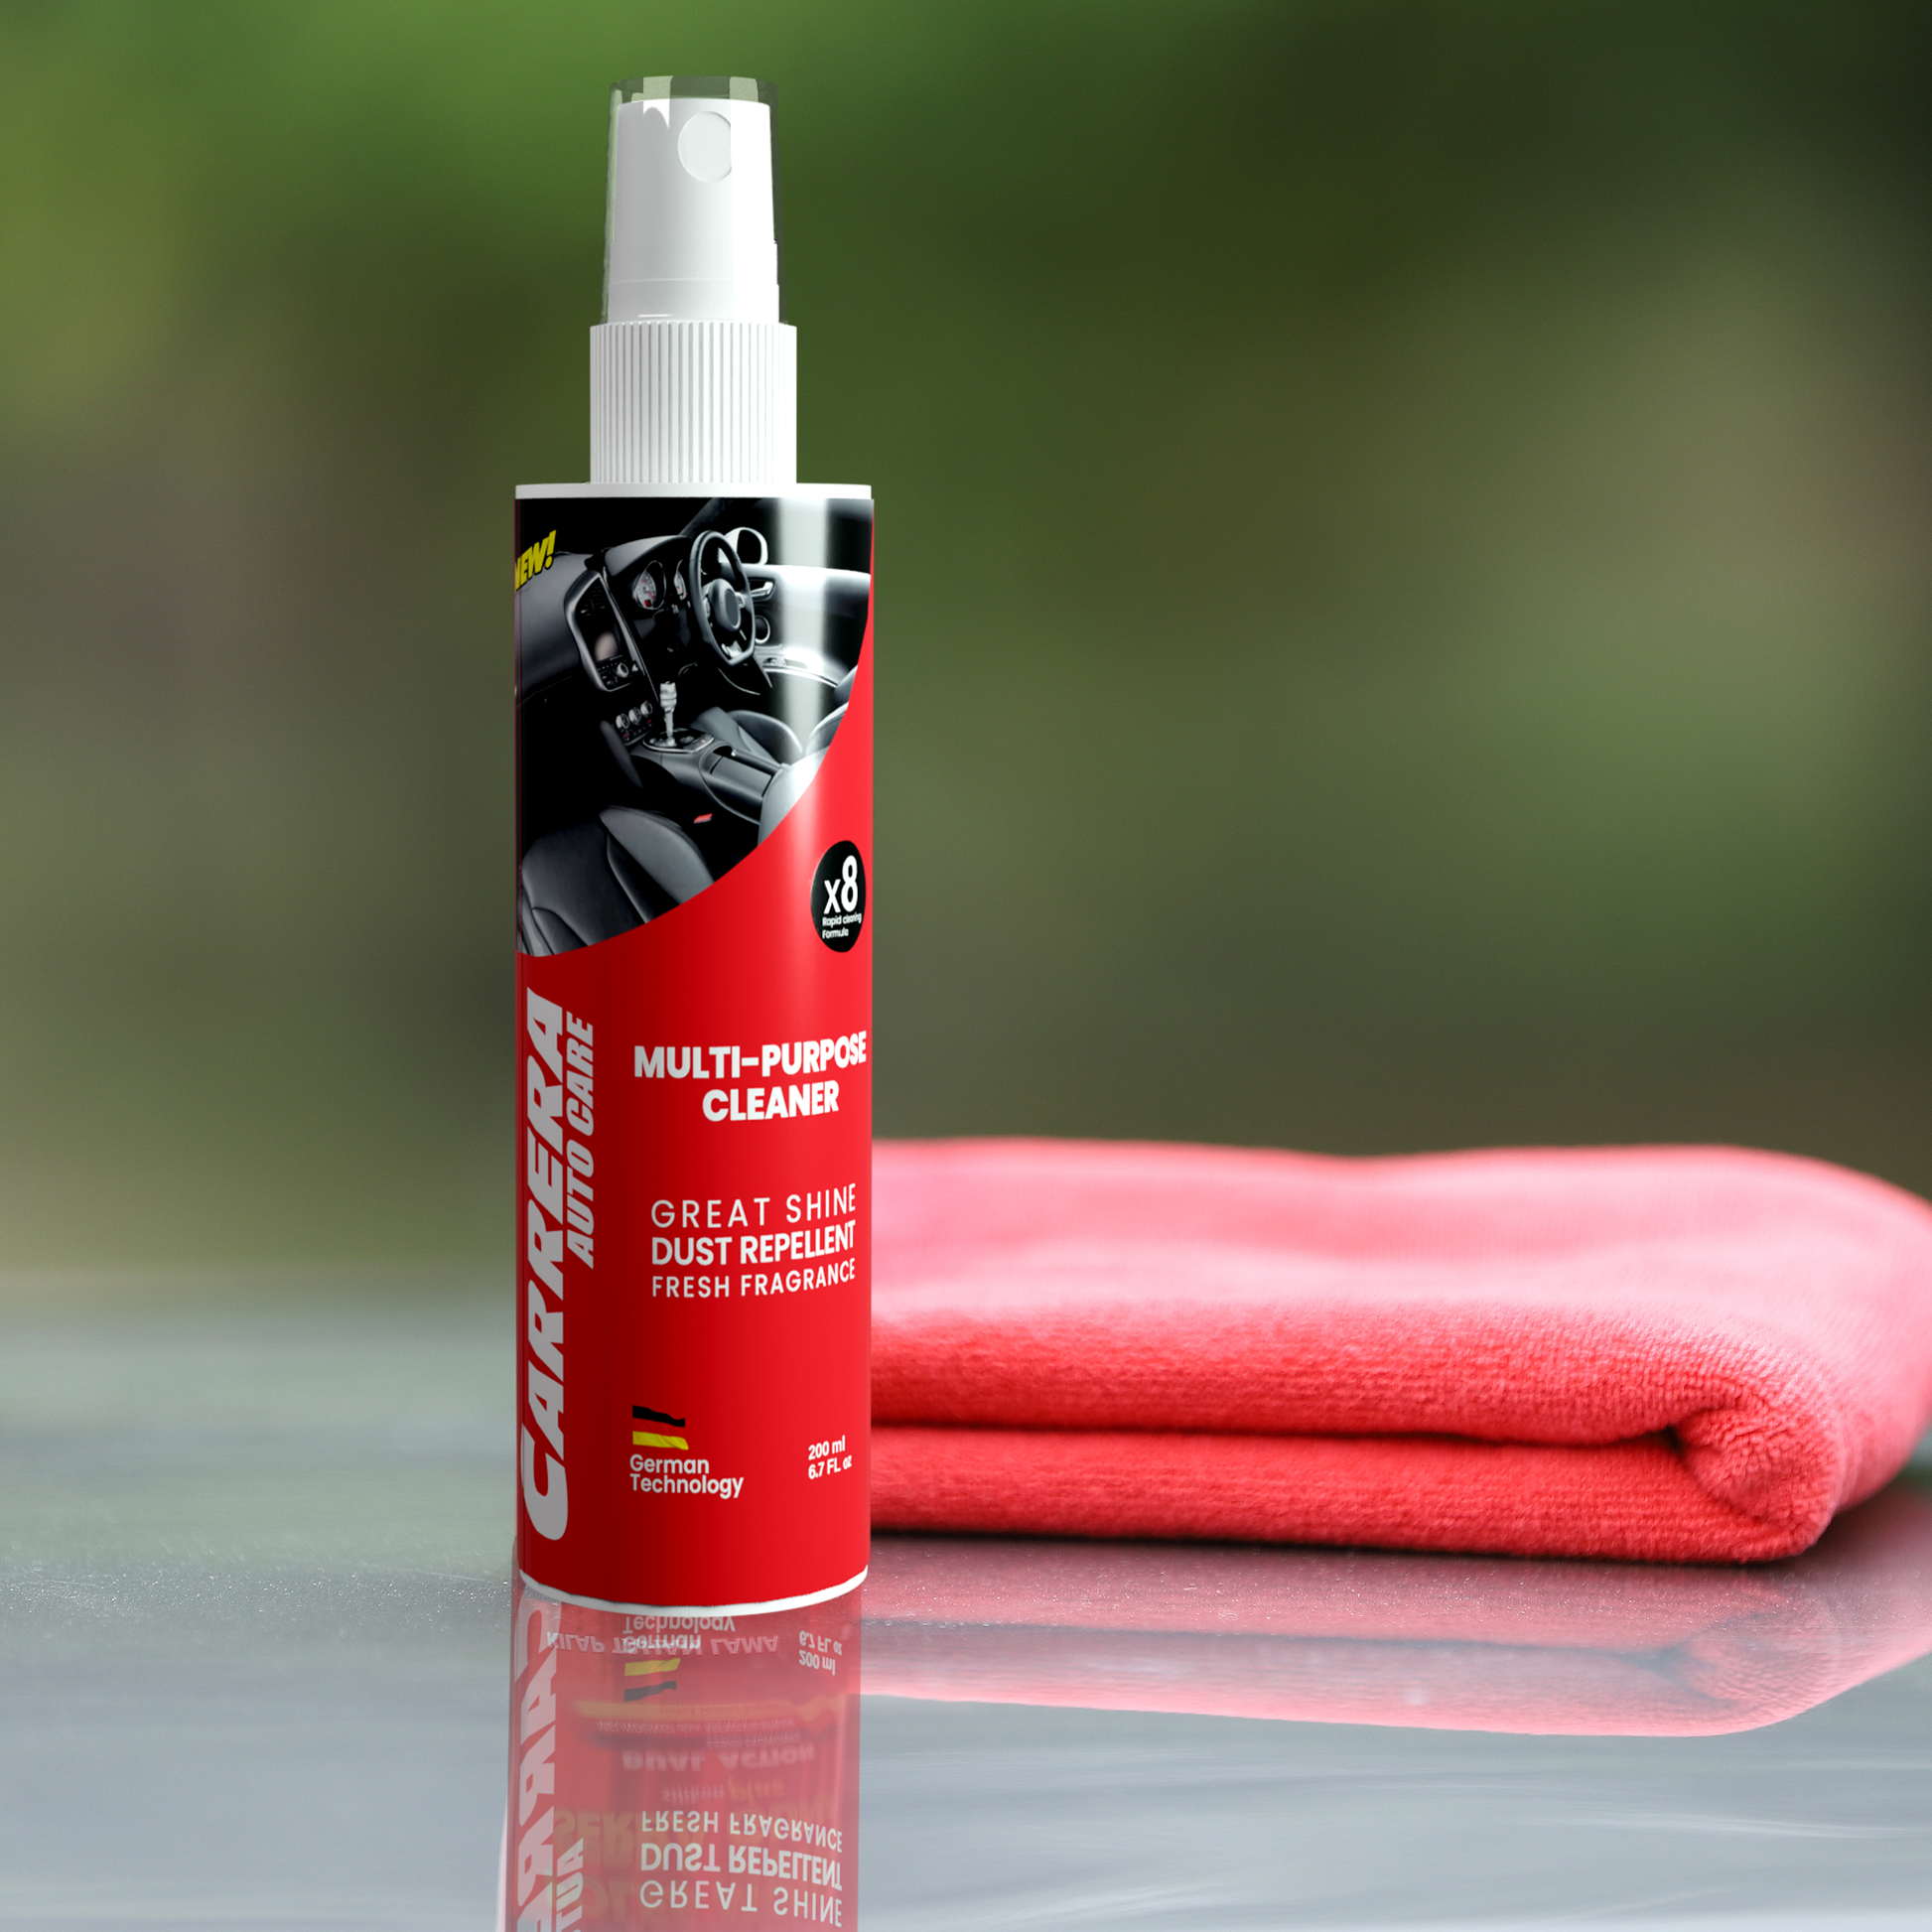 Bottle of Carrera Dashboard cleaner and towel